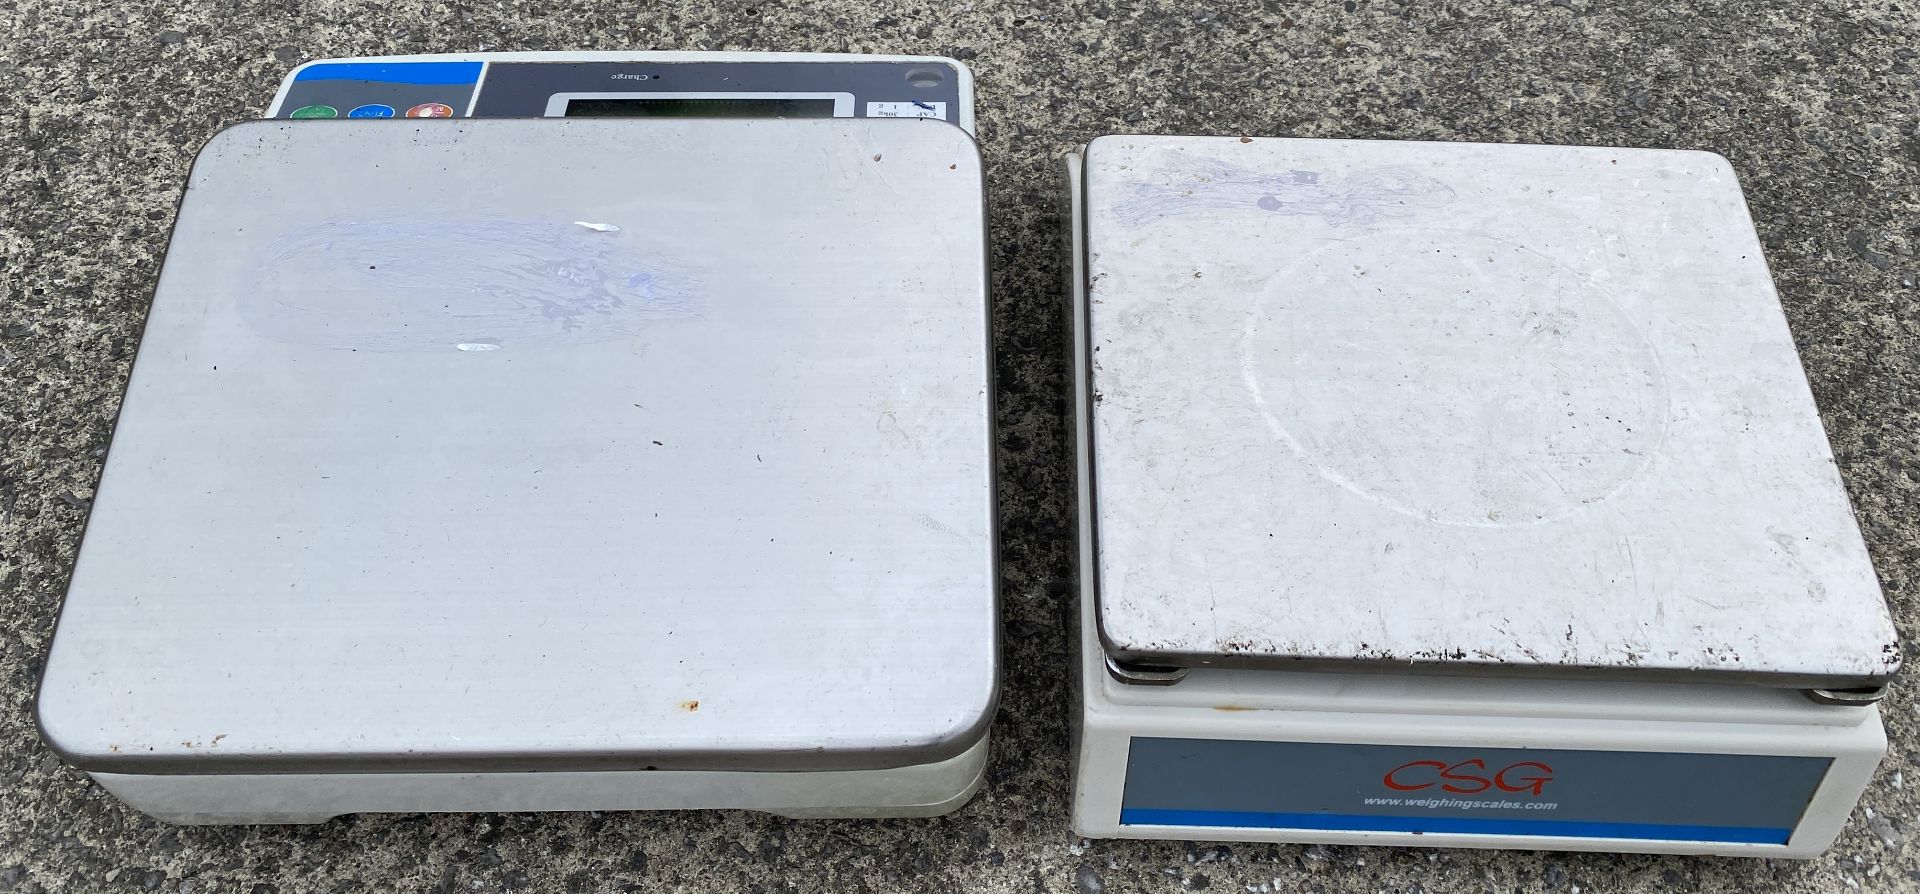 A CDG ES-30KHTS weighing scale and a CSG EHW-B weighing scale (Saleroom location: C3) - Image 2 of 3